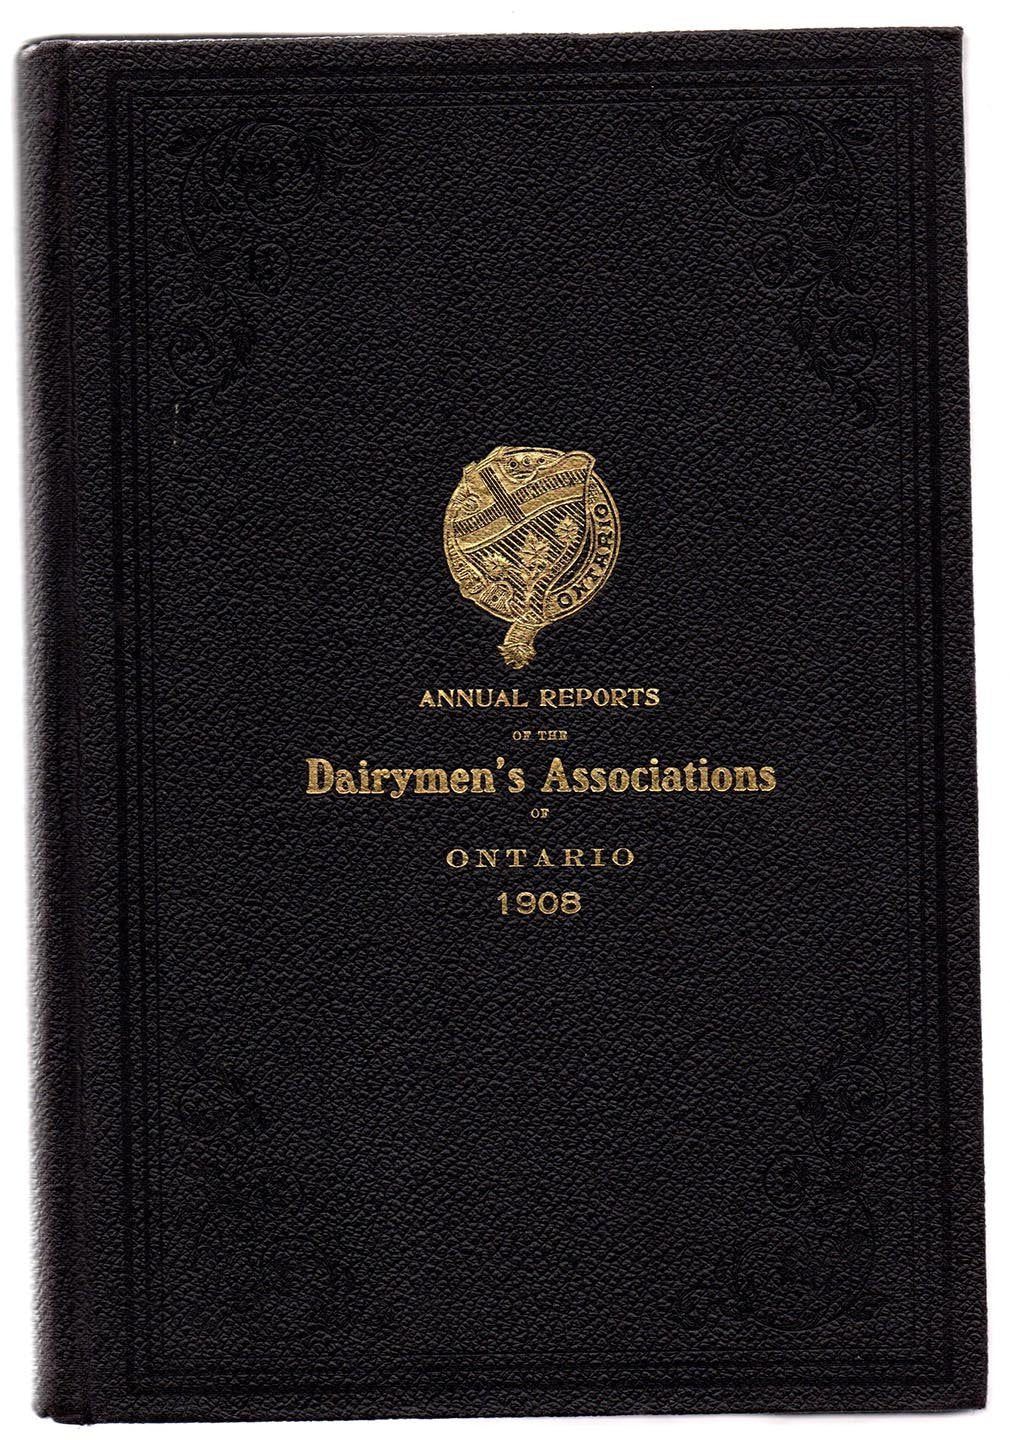 Annual Reports of the Dairymen's Associations of the Province of Ontario, 1908